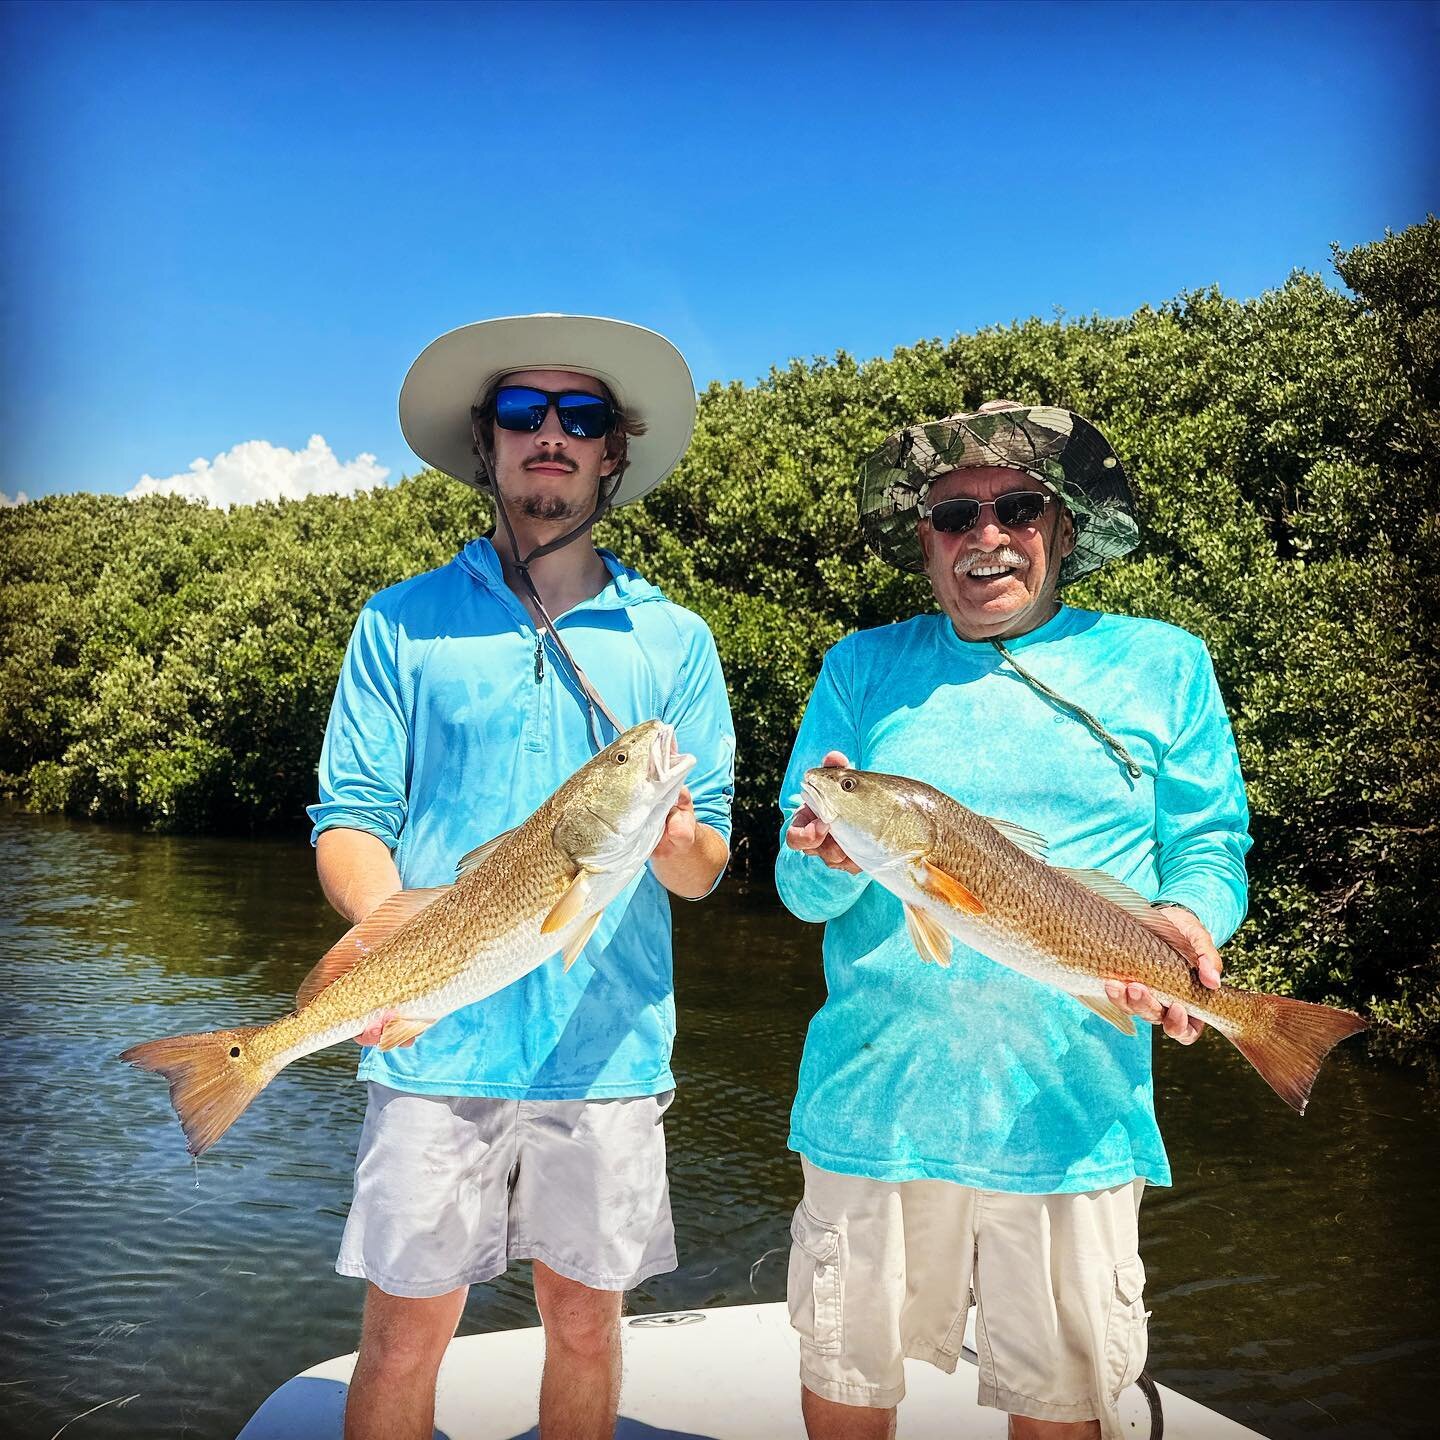 Mike and his grandson Landon did a great job on nice reds this afternoon #crystalriver #captjameskerr
#crystalriverflatsfishing #fishing #naturecoast #seatrout #snook  #visitflorida #sodiumfishinggear #crystalriverfishing #inshorefishing #redfish 

w